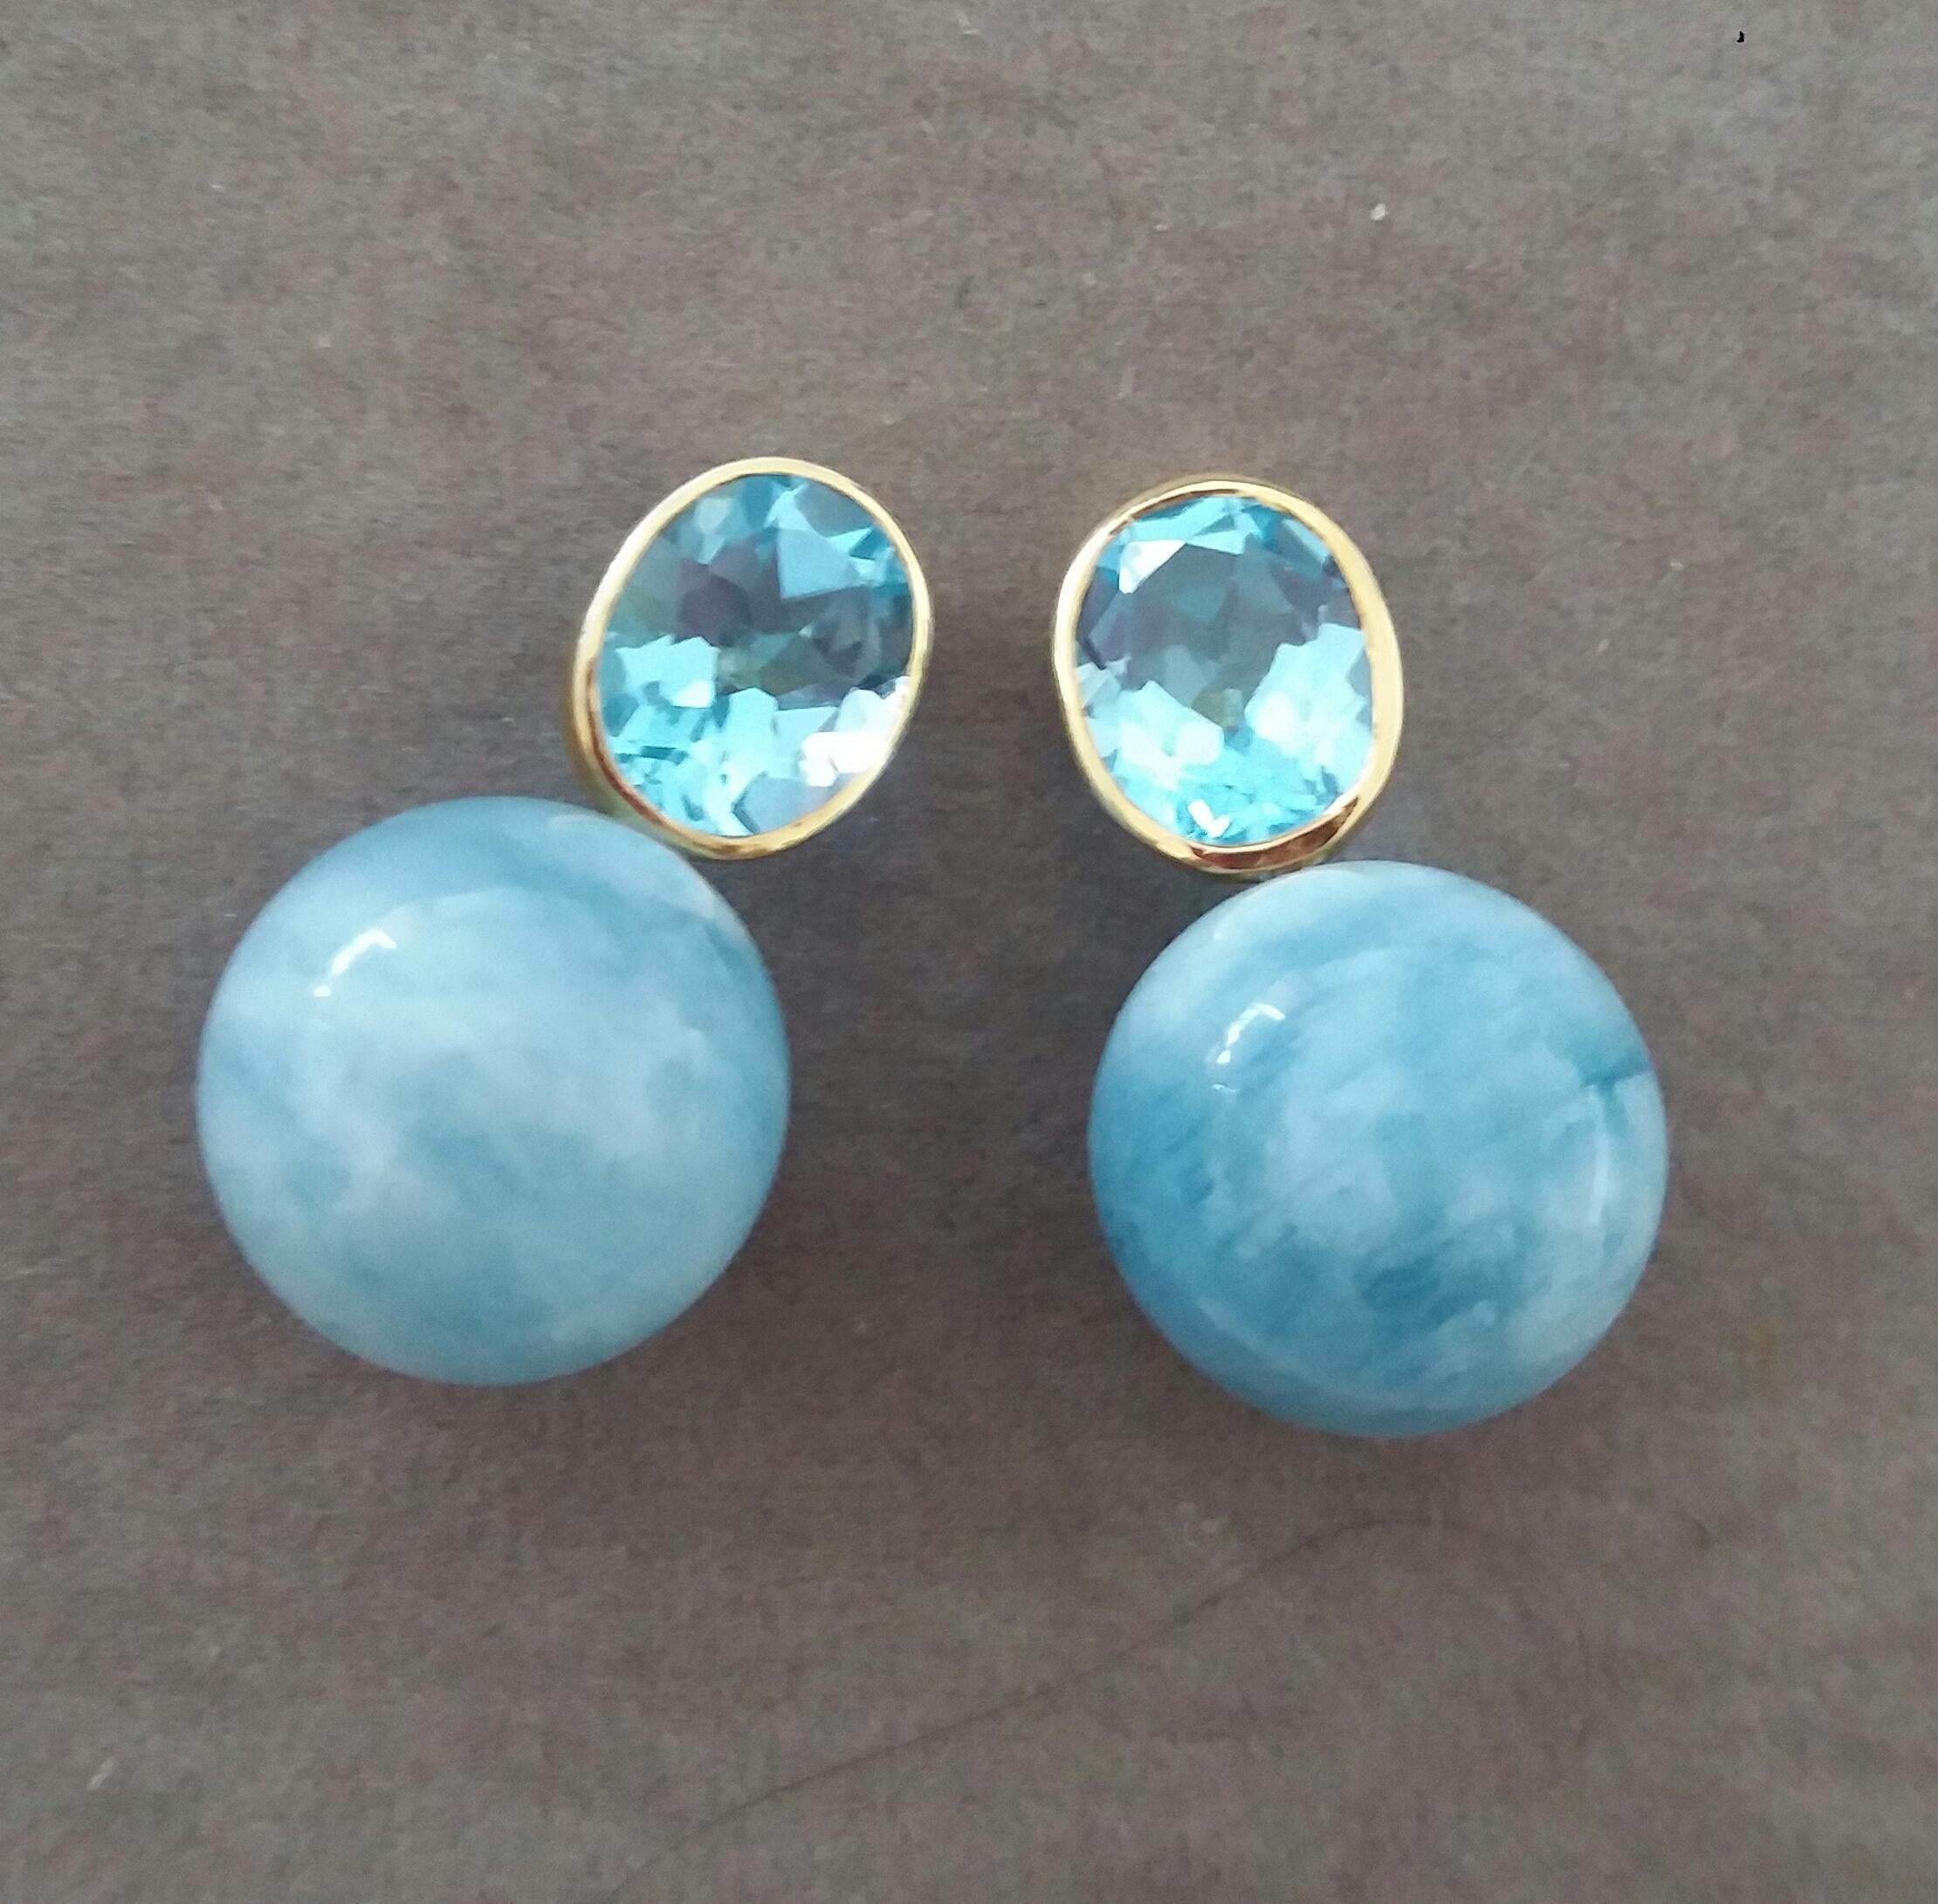 Contemporary Oval Faceted Sky Blue Topaz 14k Gold Aquamarine Plain Round Beads Stud Earrings